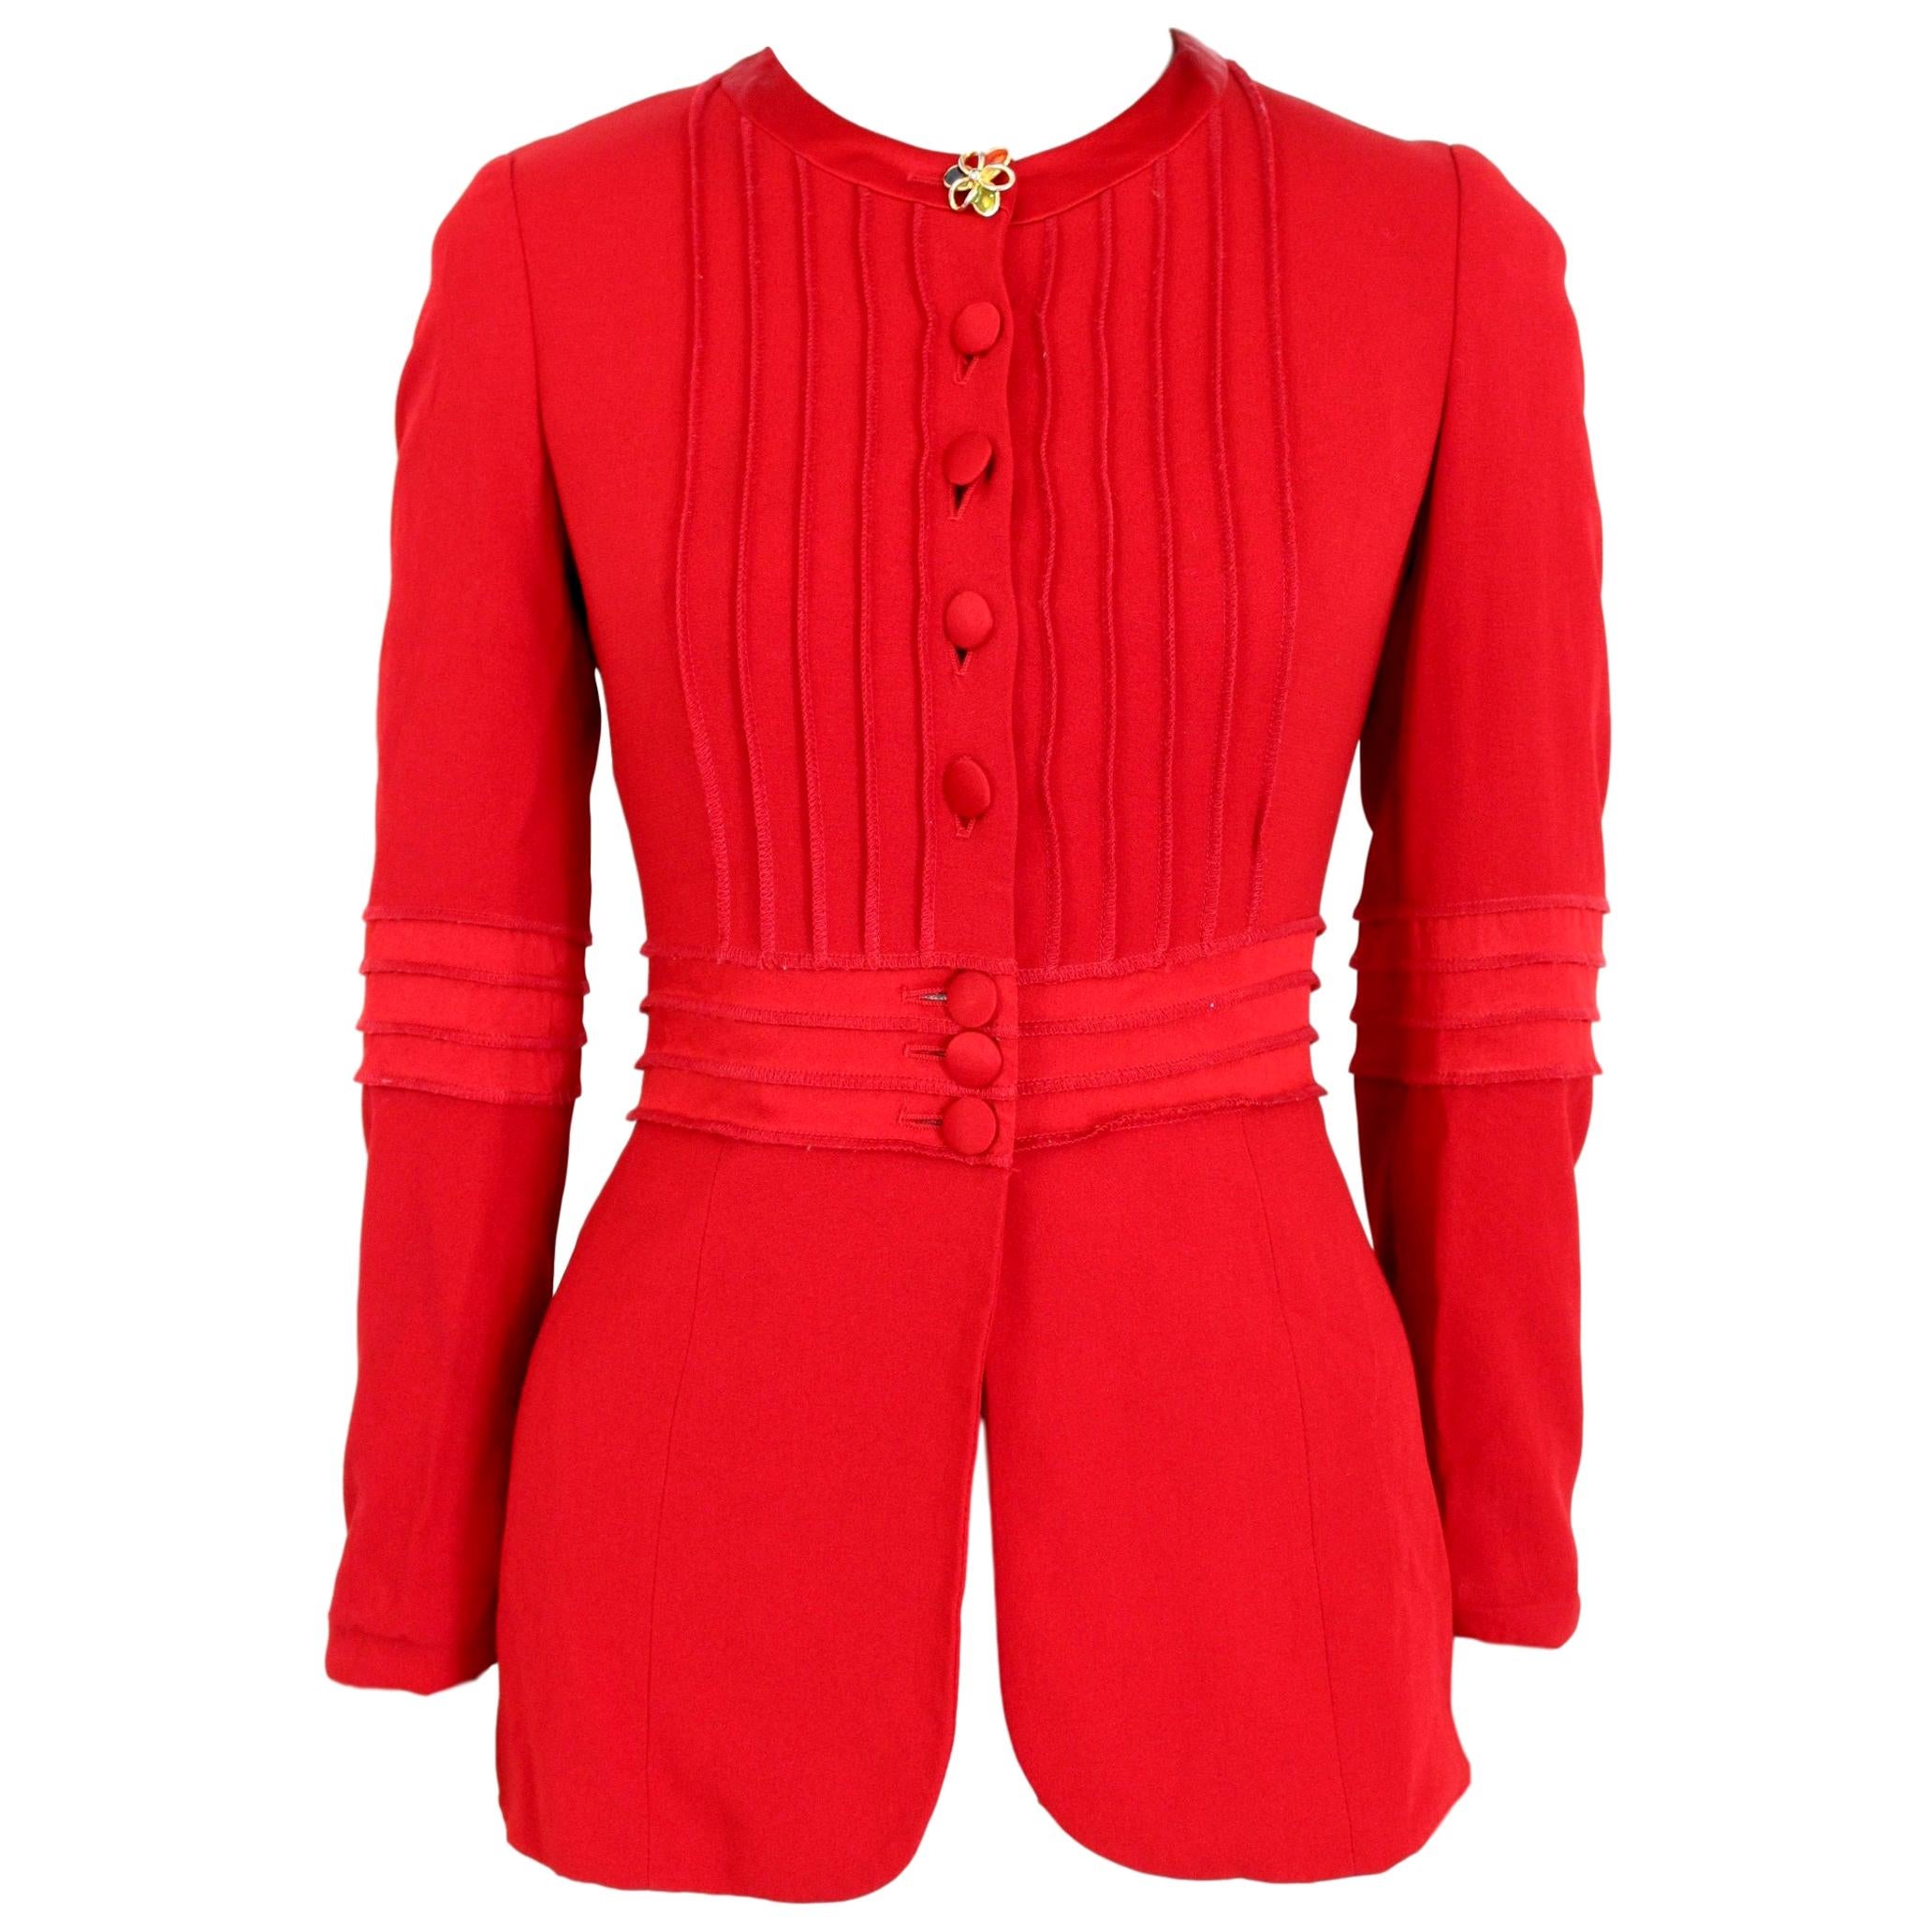 Moschino Cheap And Chic Red Button Jewel Evening Flared Jacket 